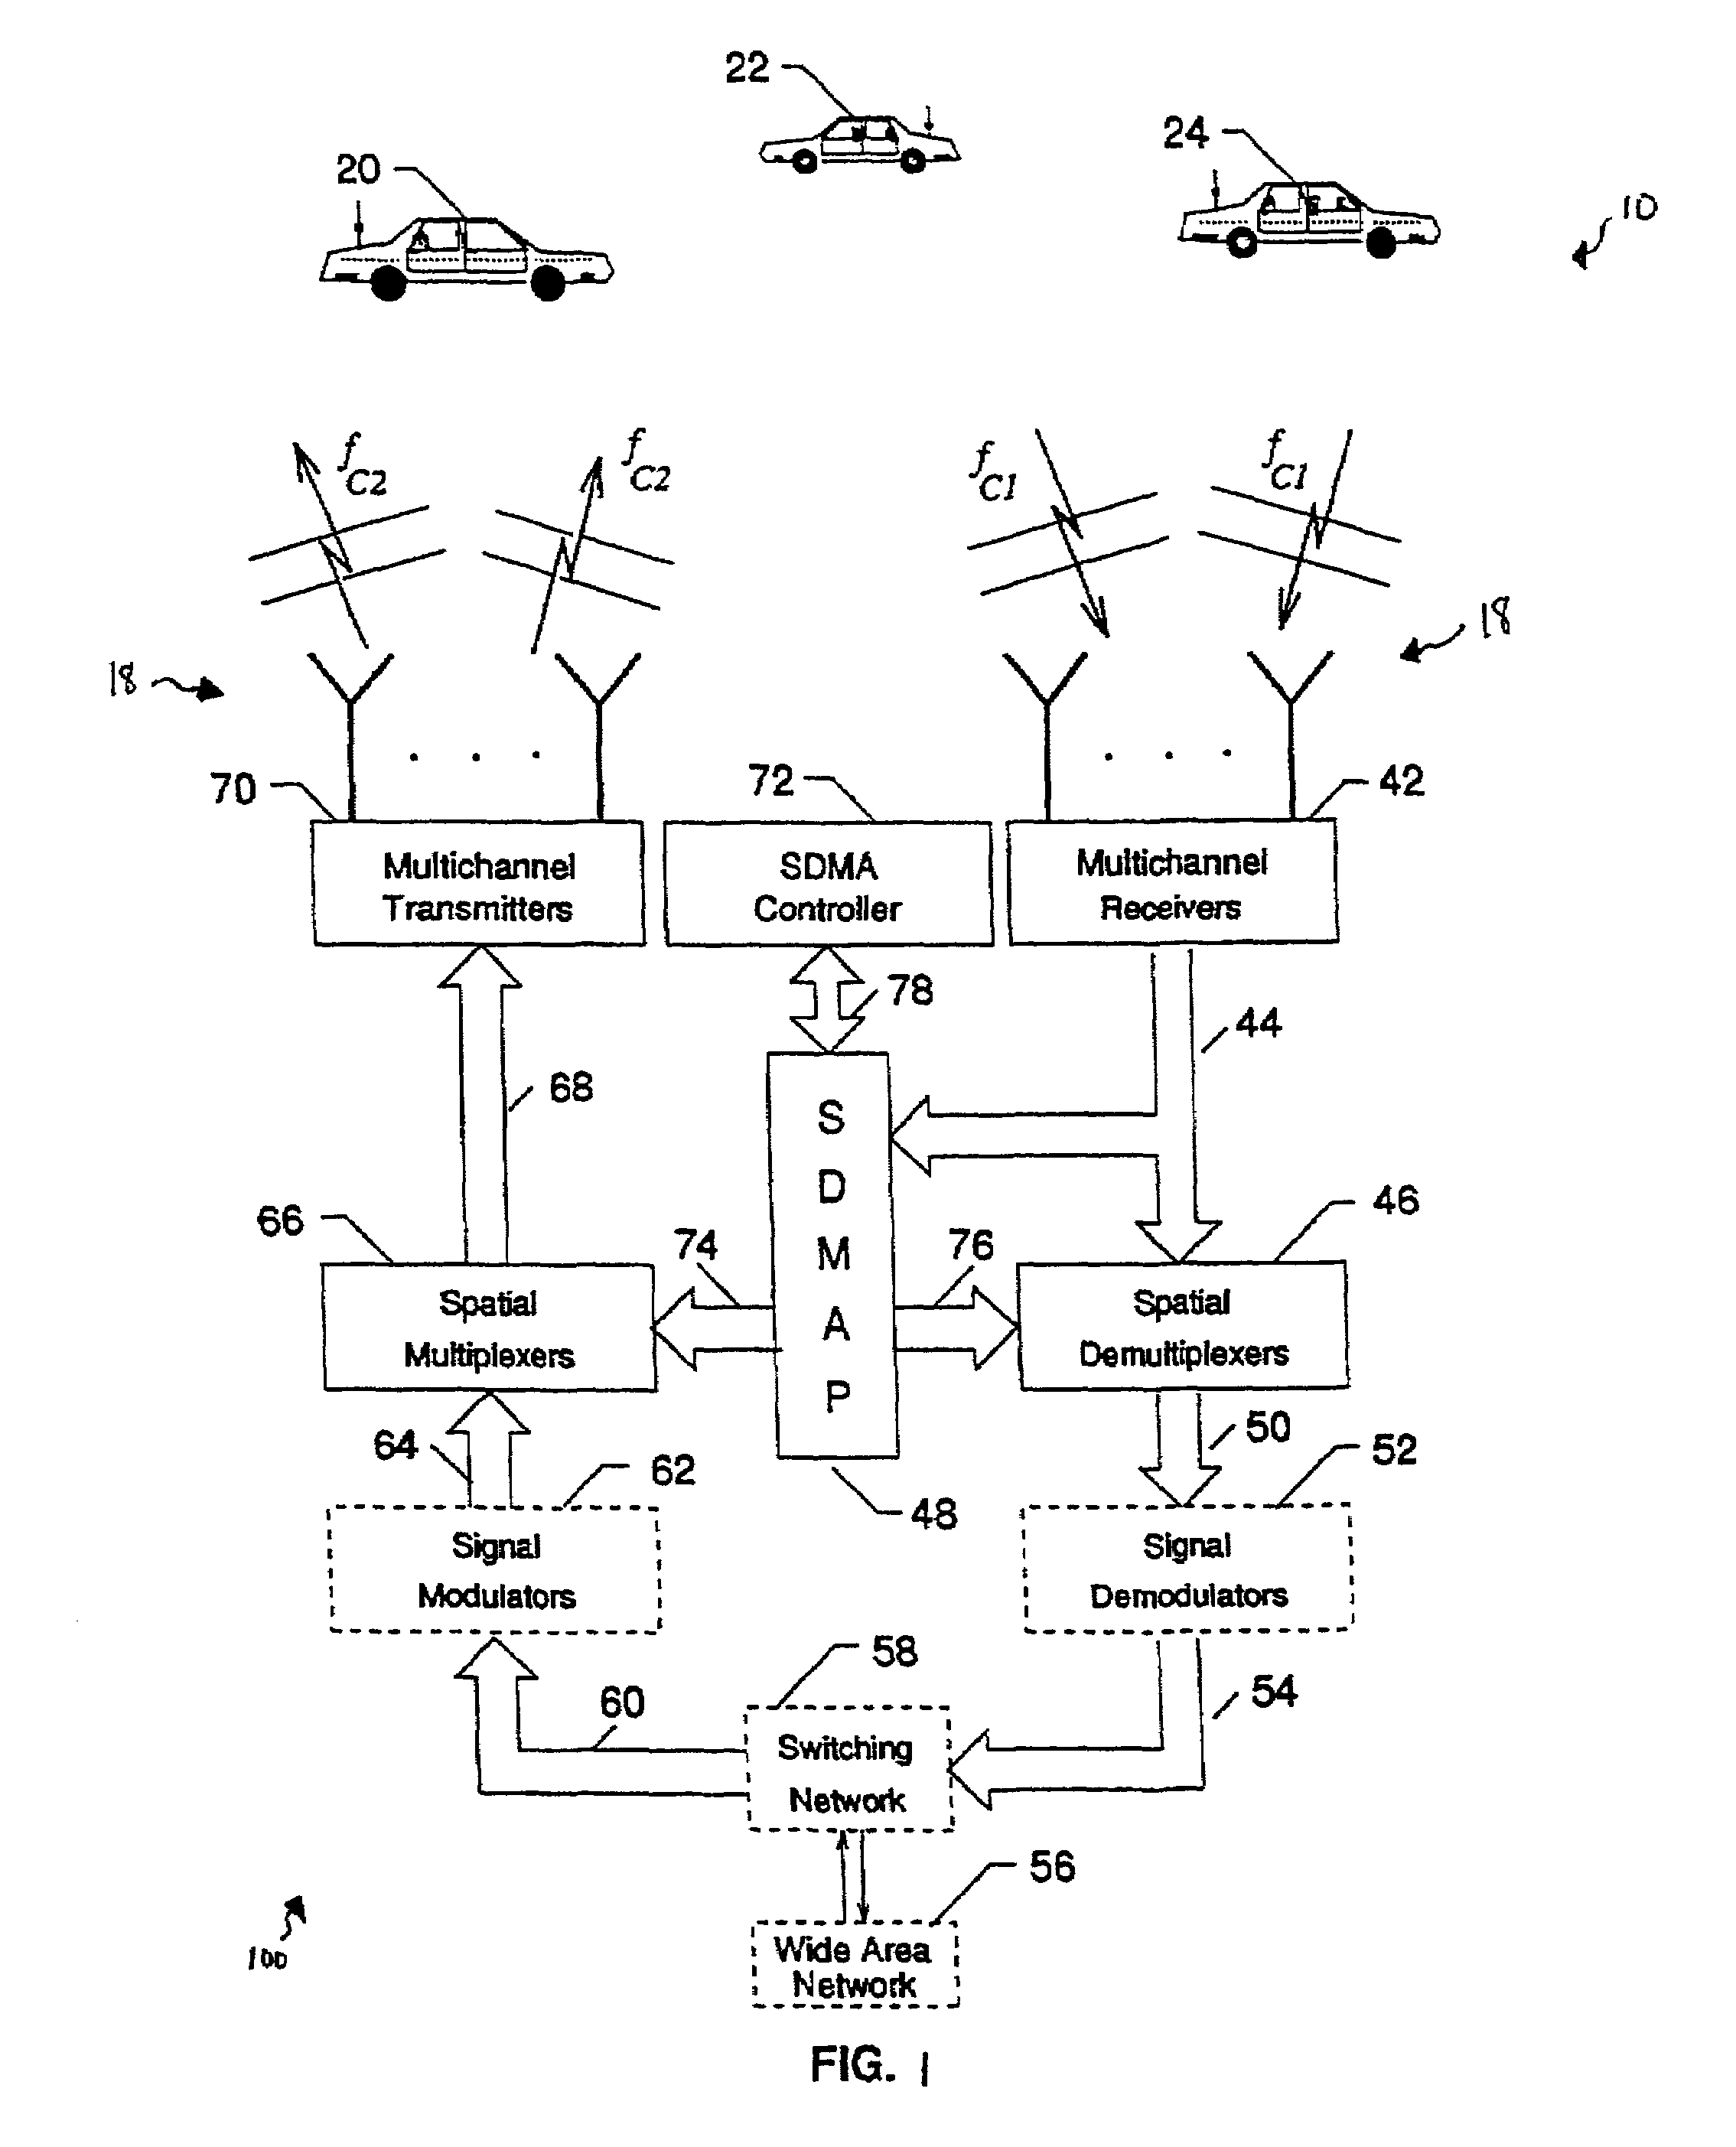 Channel assignments in a wireless communication system having spatial channels including grouping existing subscribers in anticipation of a new subscriber